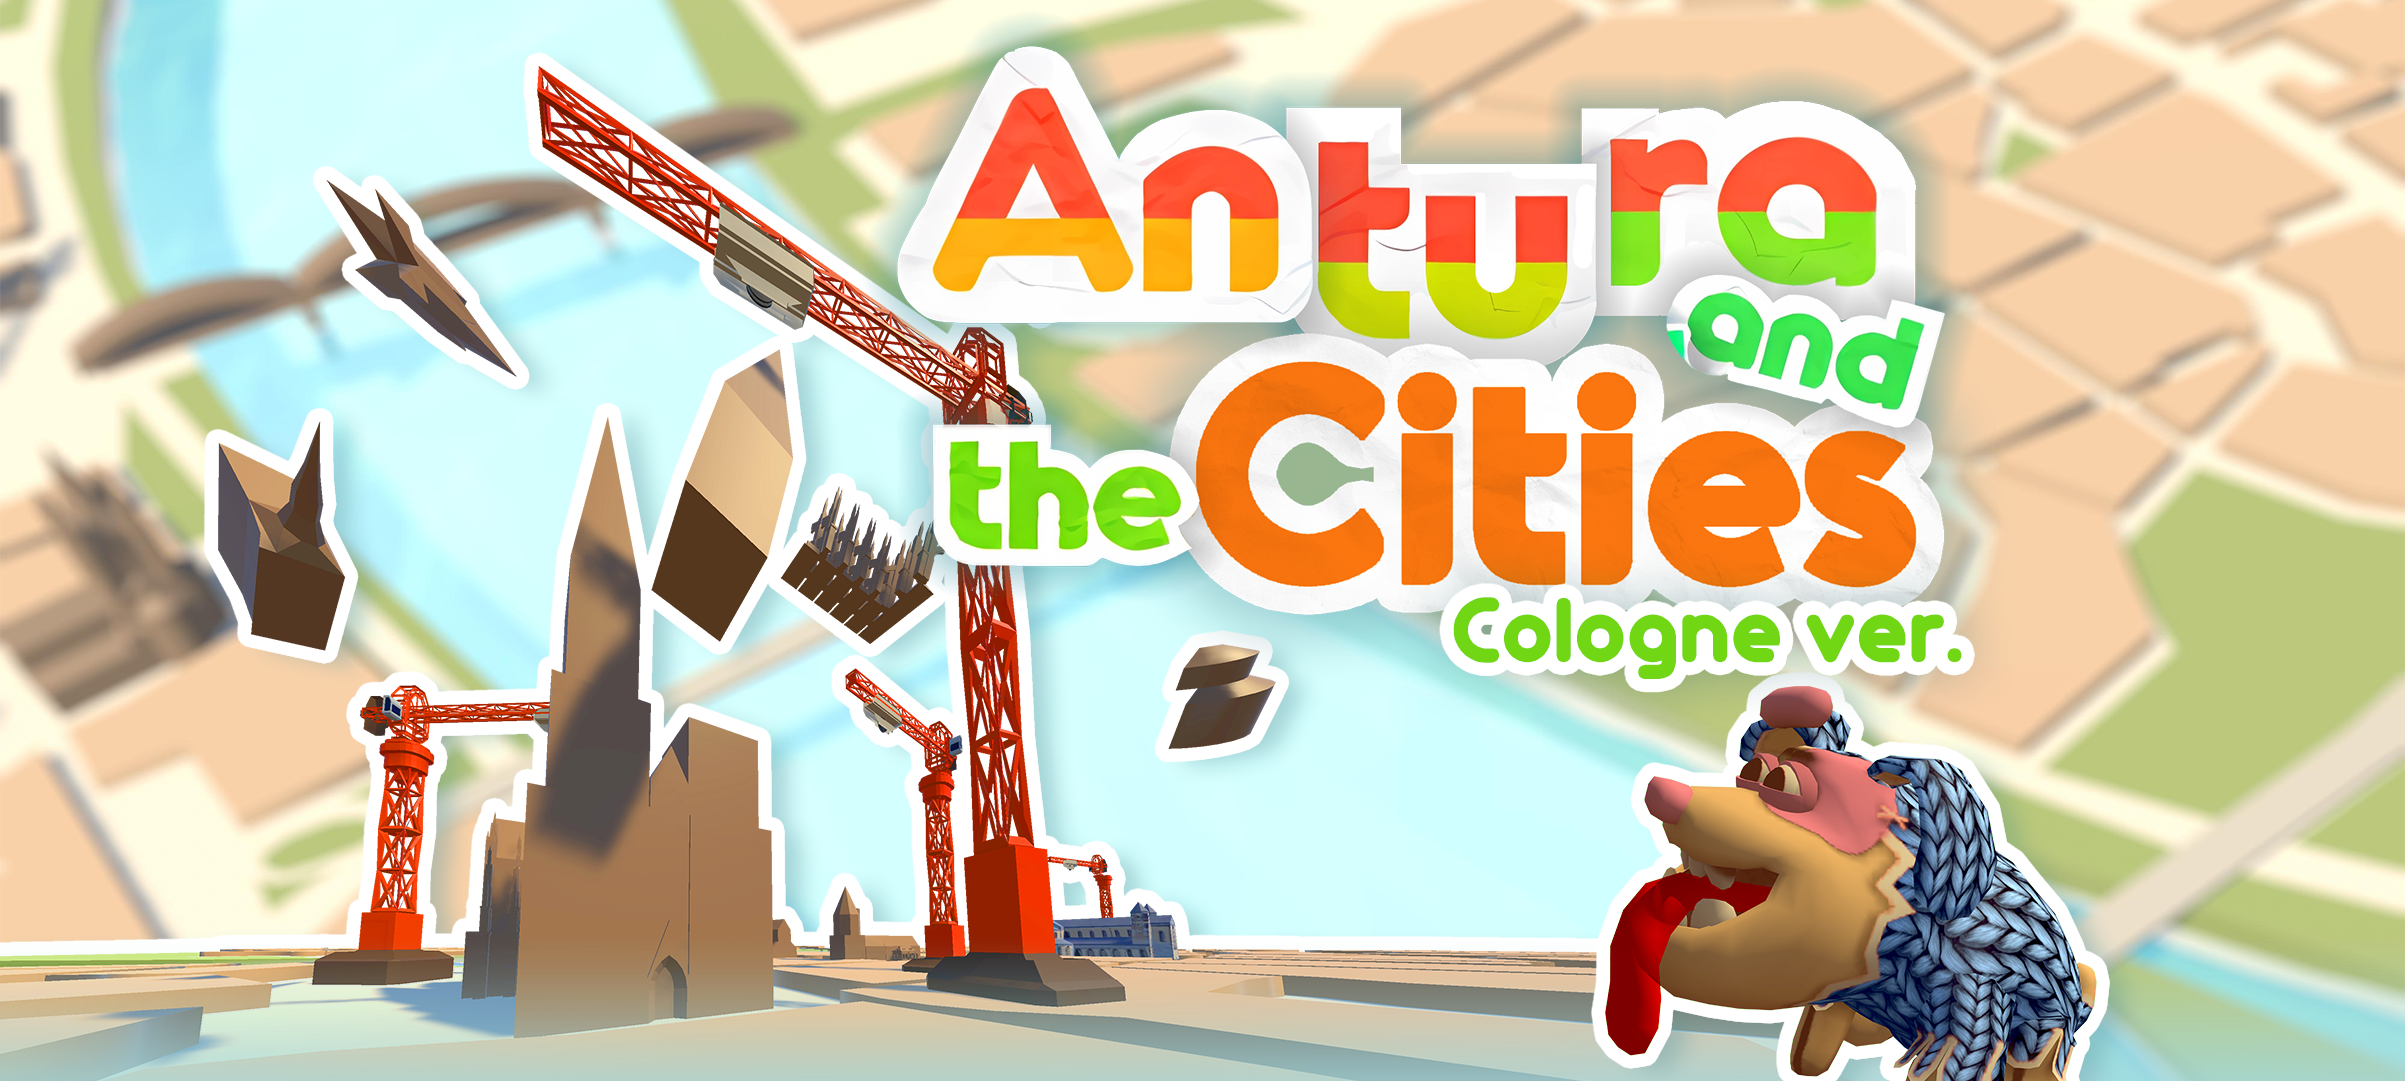 Antura and the Cities-Cologne